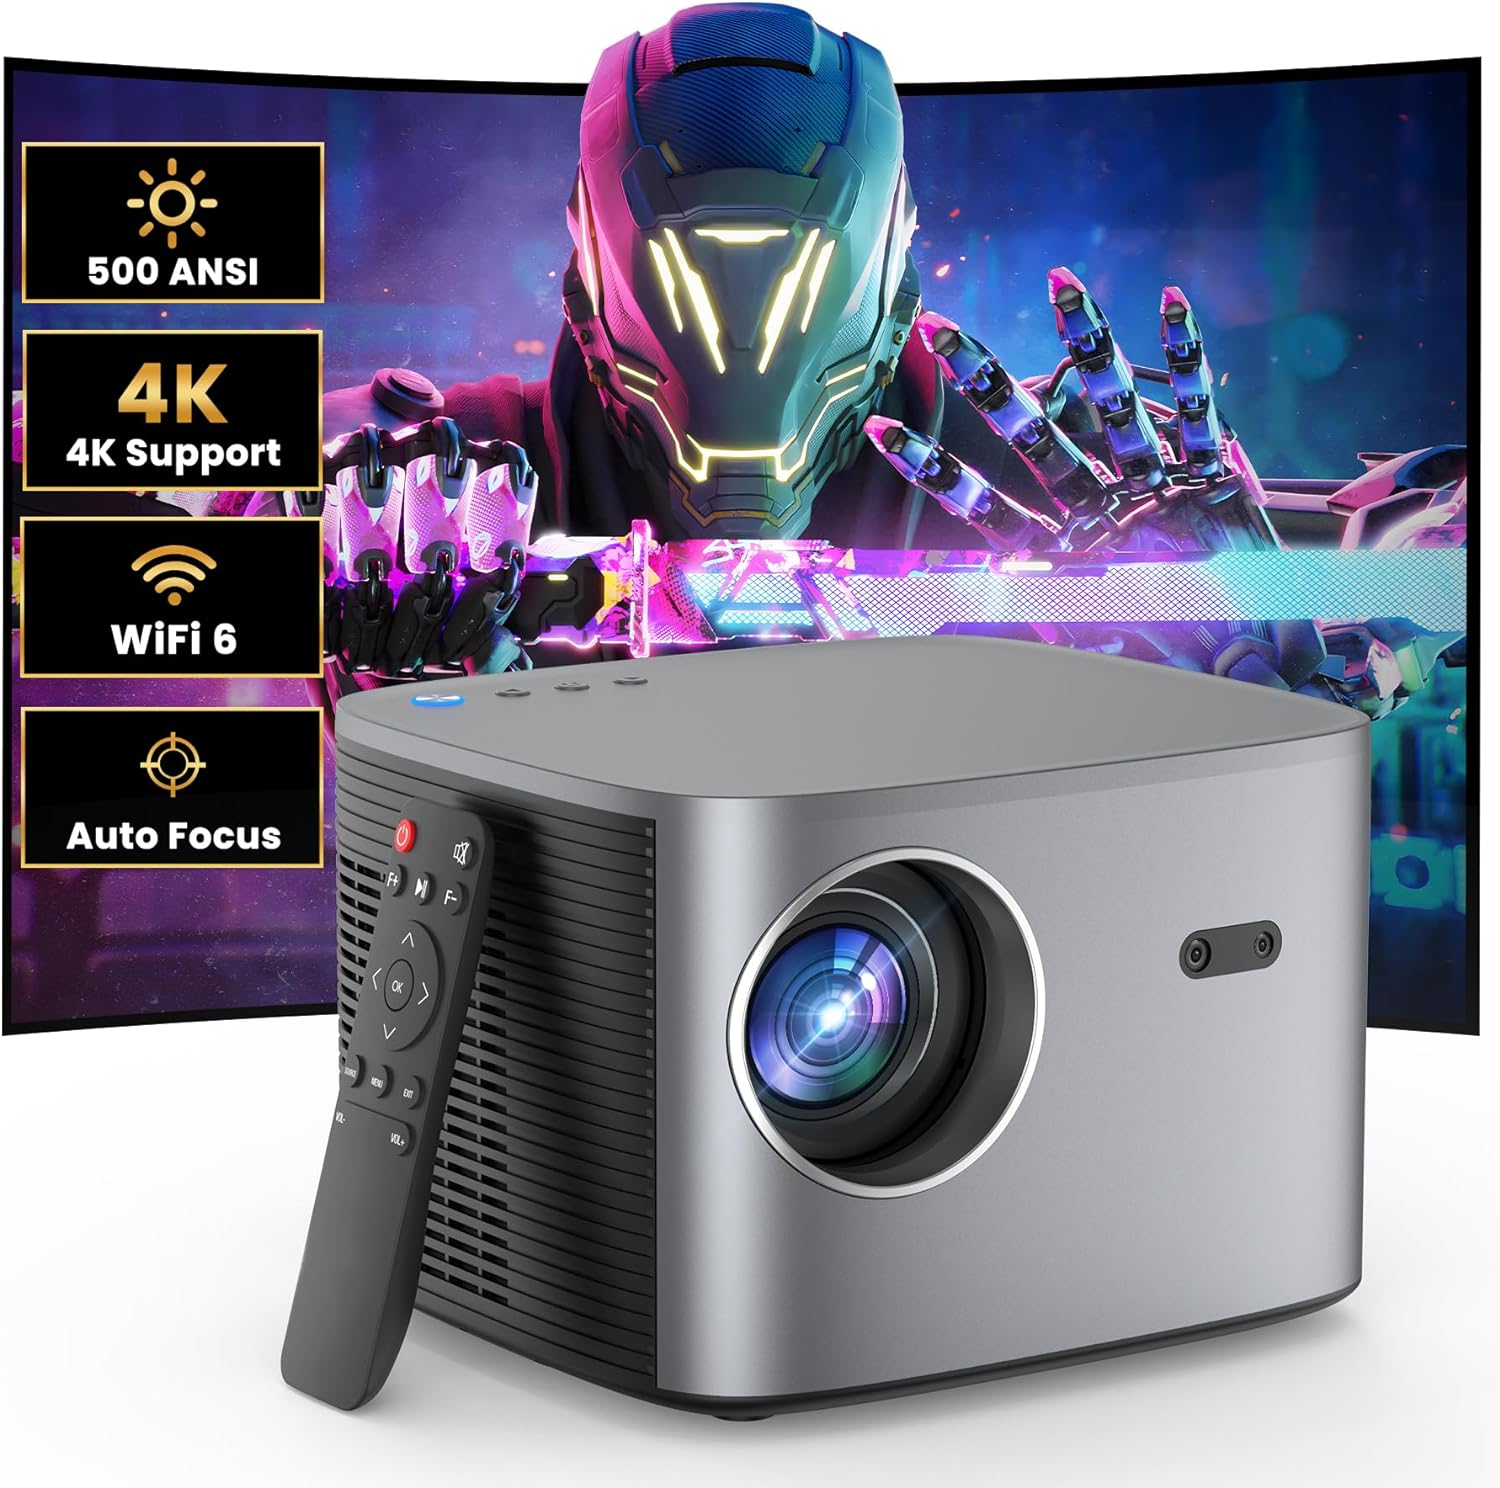 [Auto Focus/Keystone] Groview Projector with WiFi 6 and Bluetooth 5.2, Support 4K Projector 500 ANSI Native 1080P Outdoor Projector, 50-100% Zoom Home Theater Projector for iOS/Android/HDMI/TV Stick